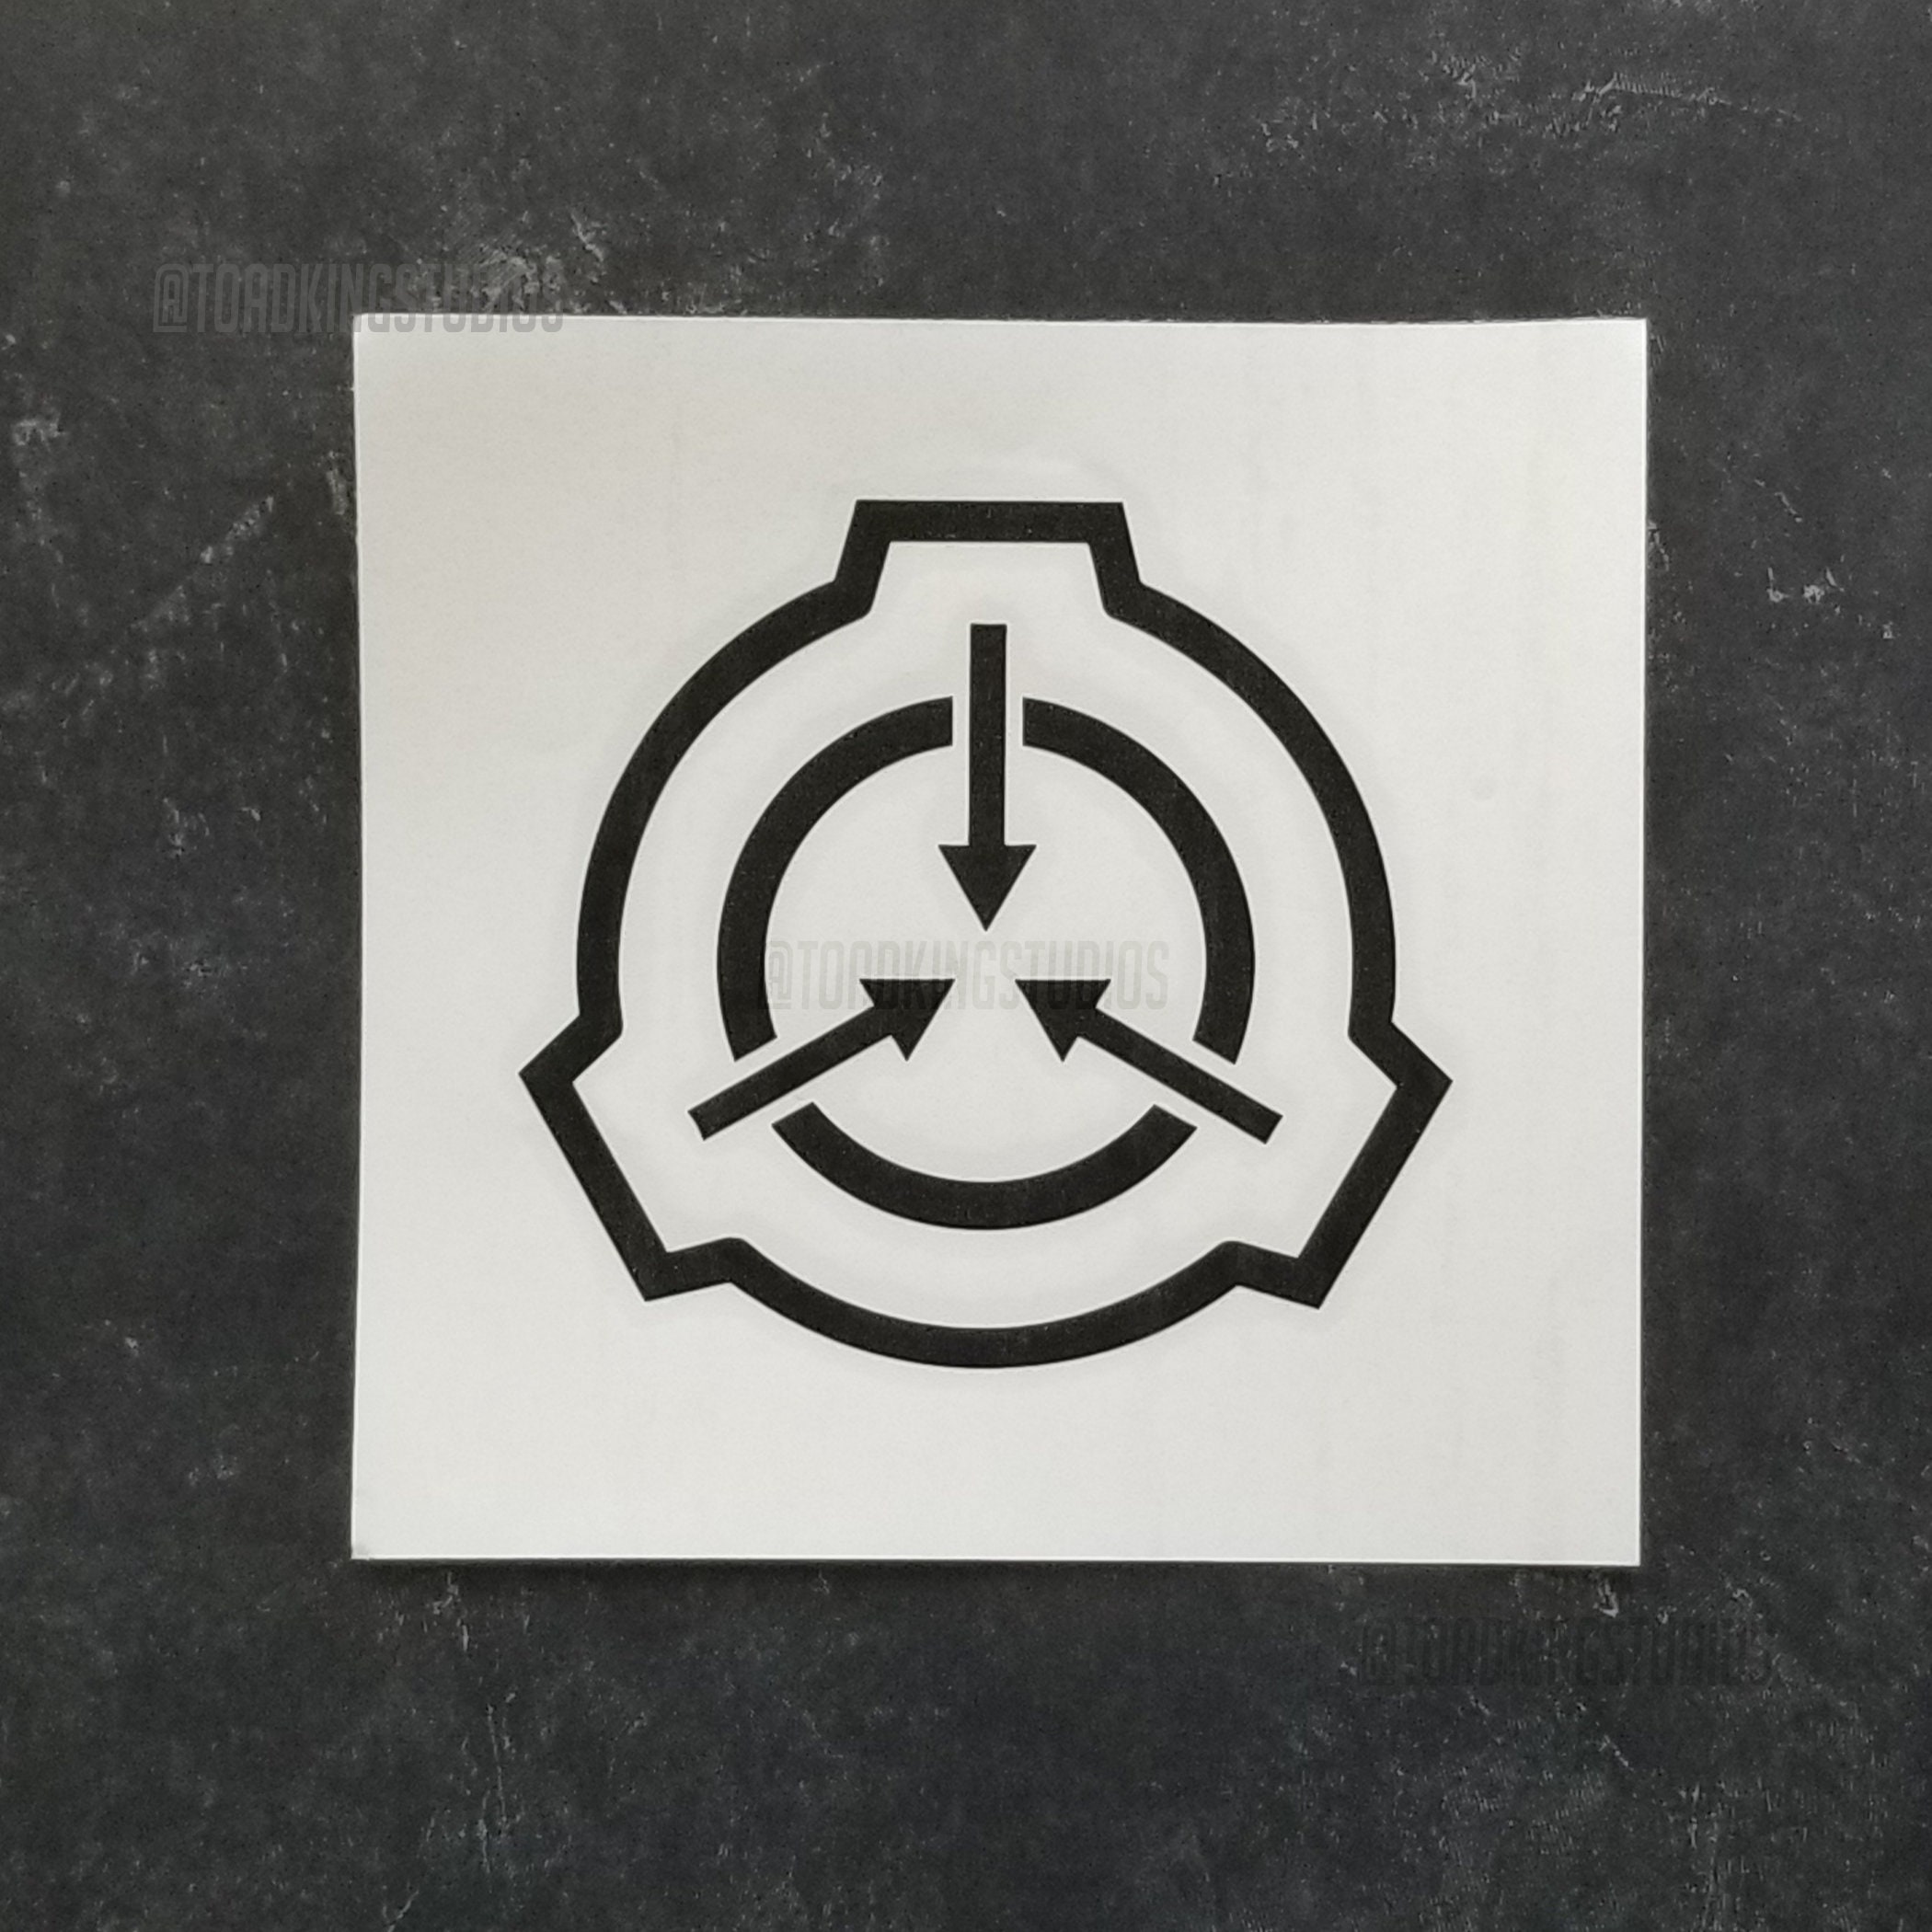 SCP Logo 3-inch Vinyl Static Cling Removeable Window Decal 